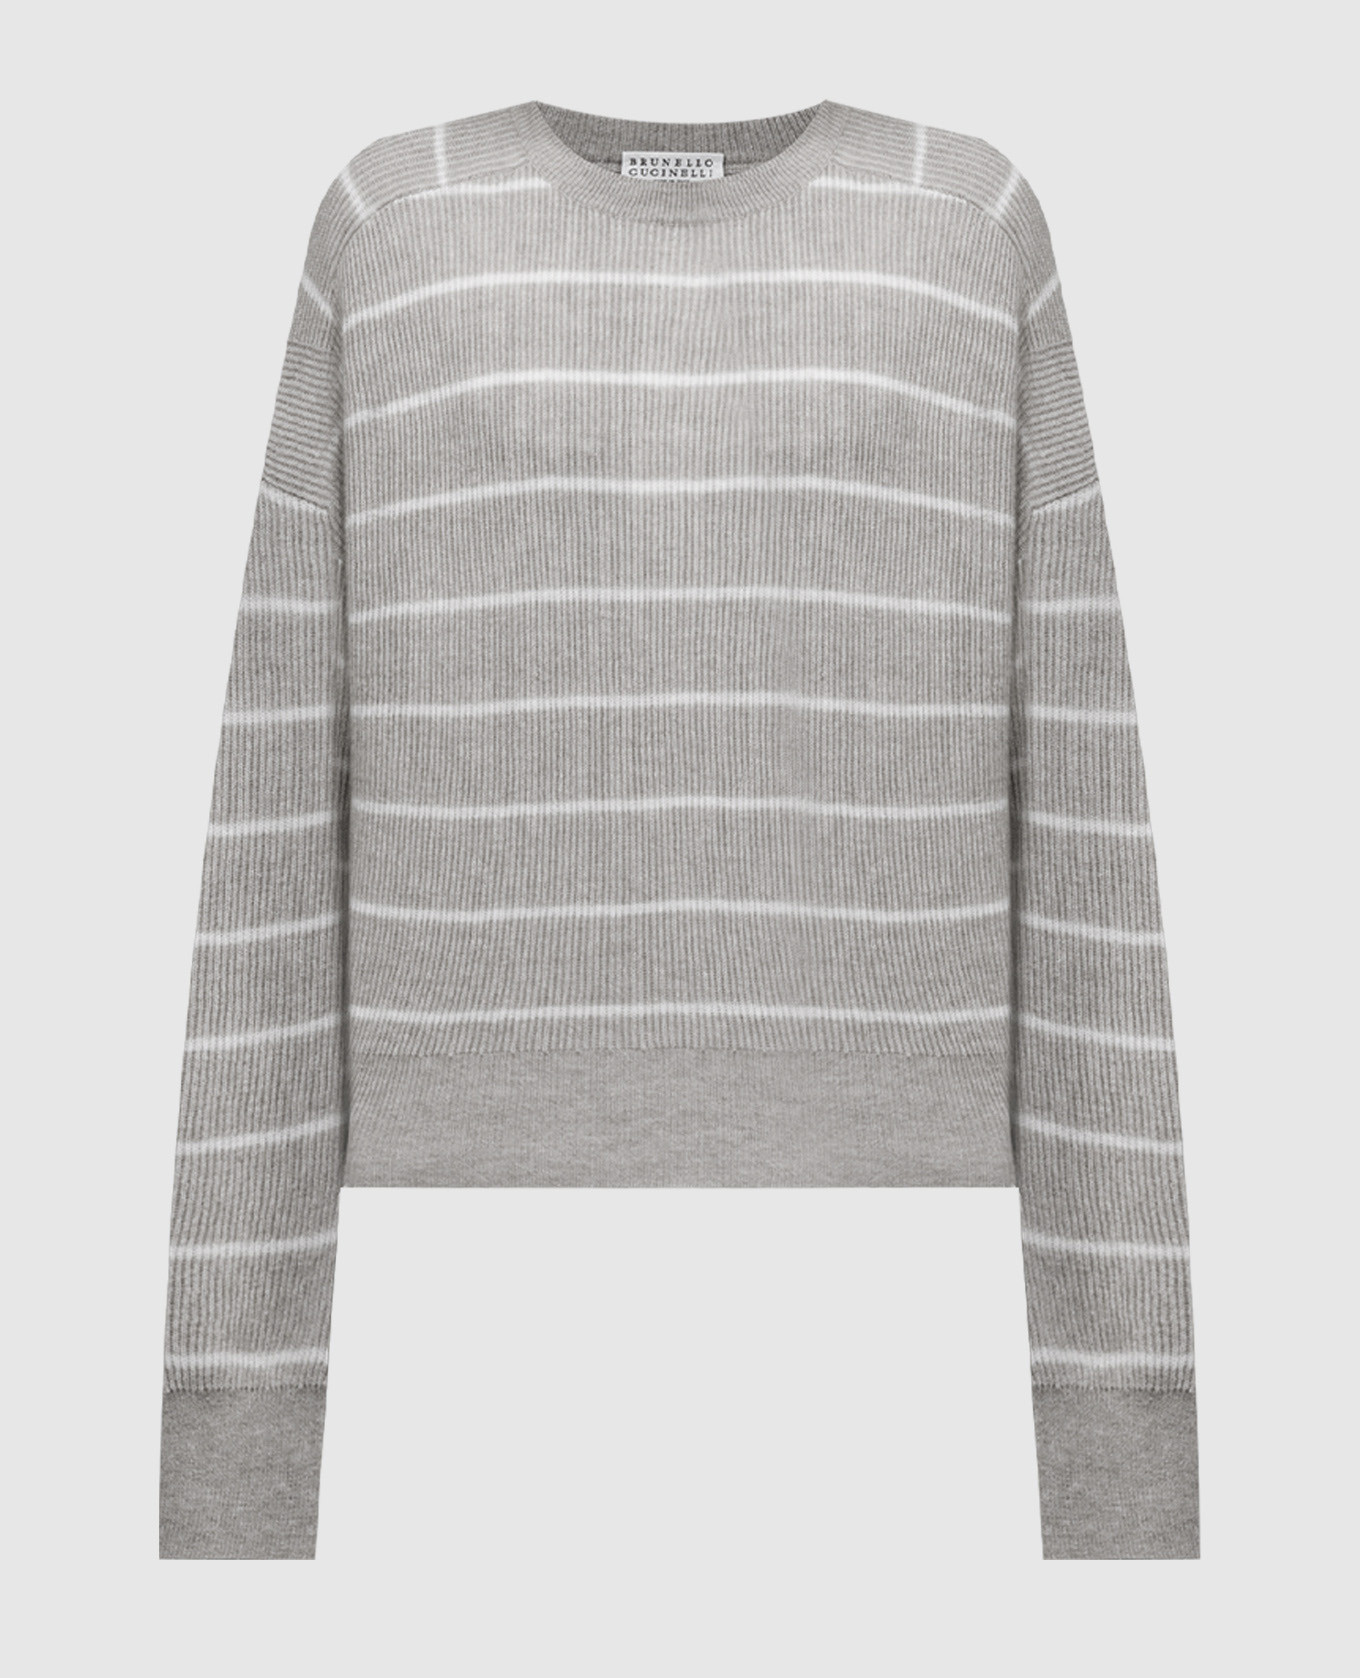 Gray striped sweater with a monil chain made of ecolathoon